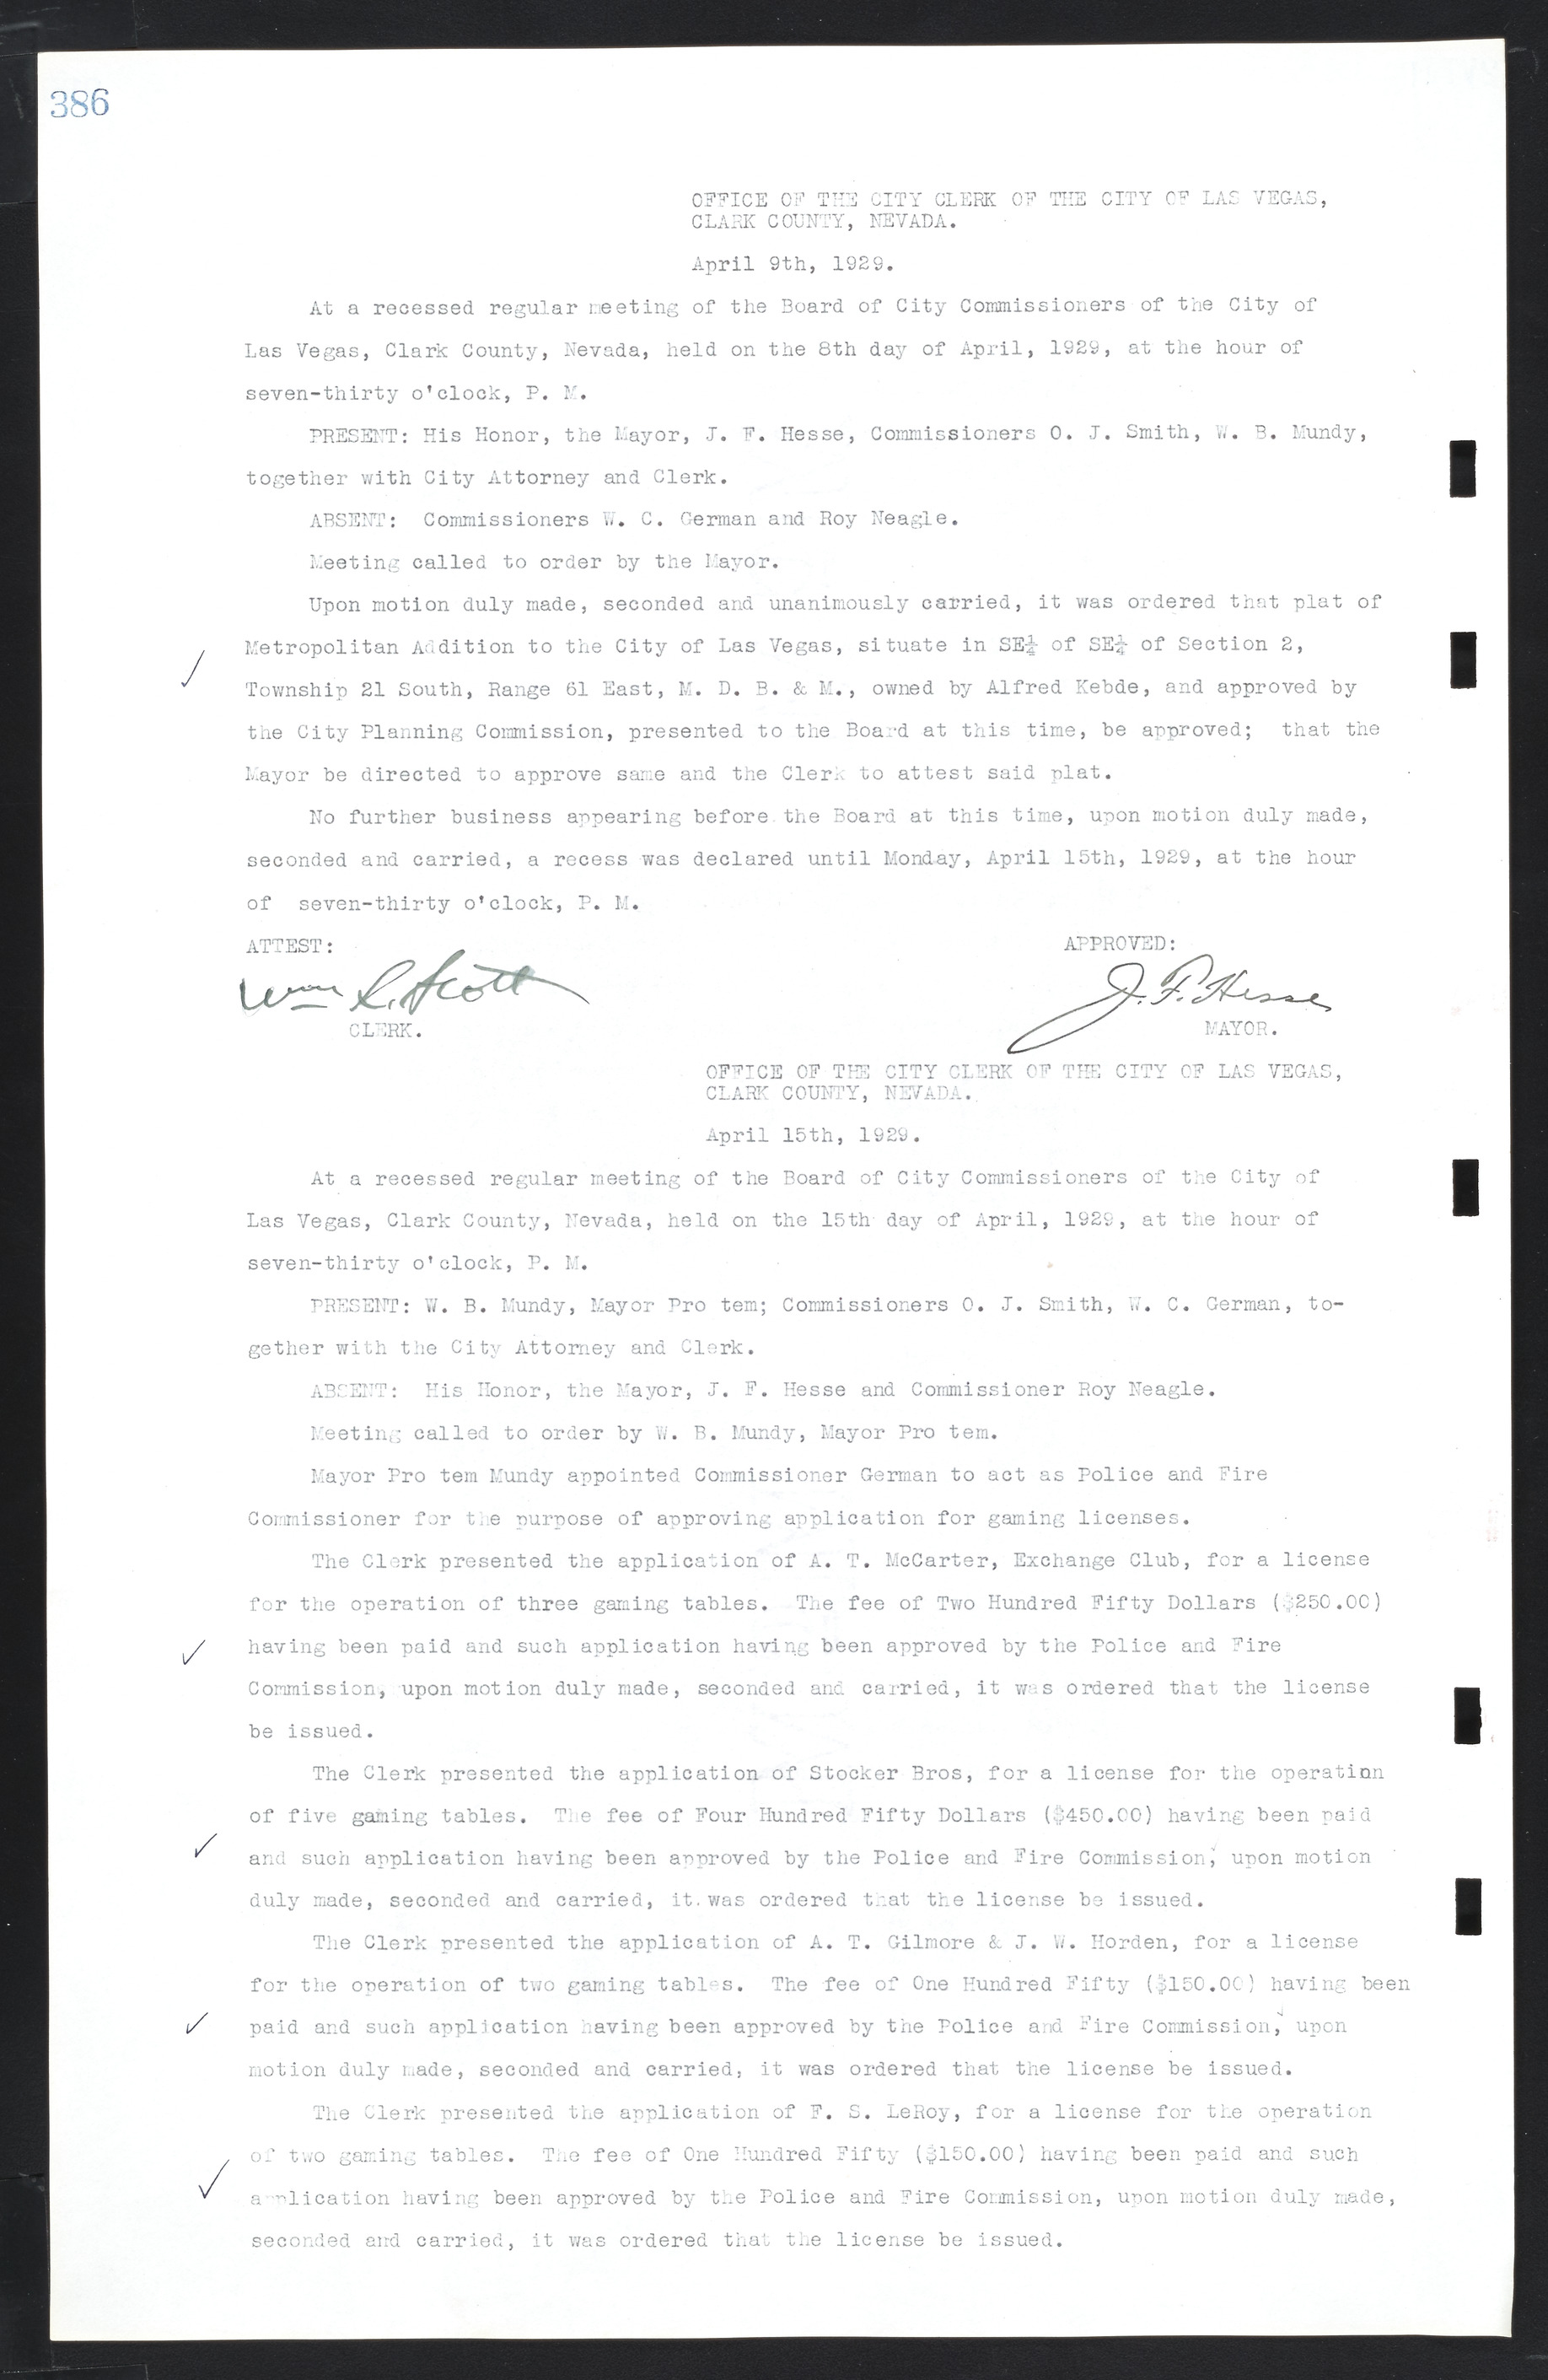 Las Vegas City Commission Minutes, March 1, 1922 to May 10, 1929, lvc000002-395